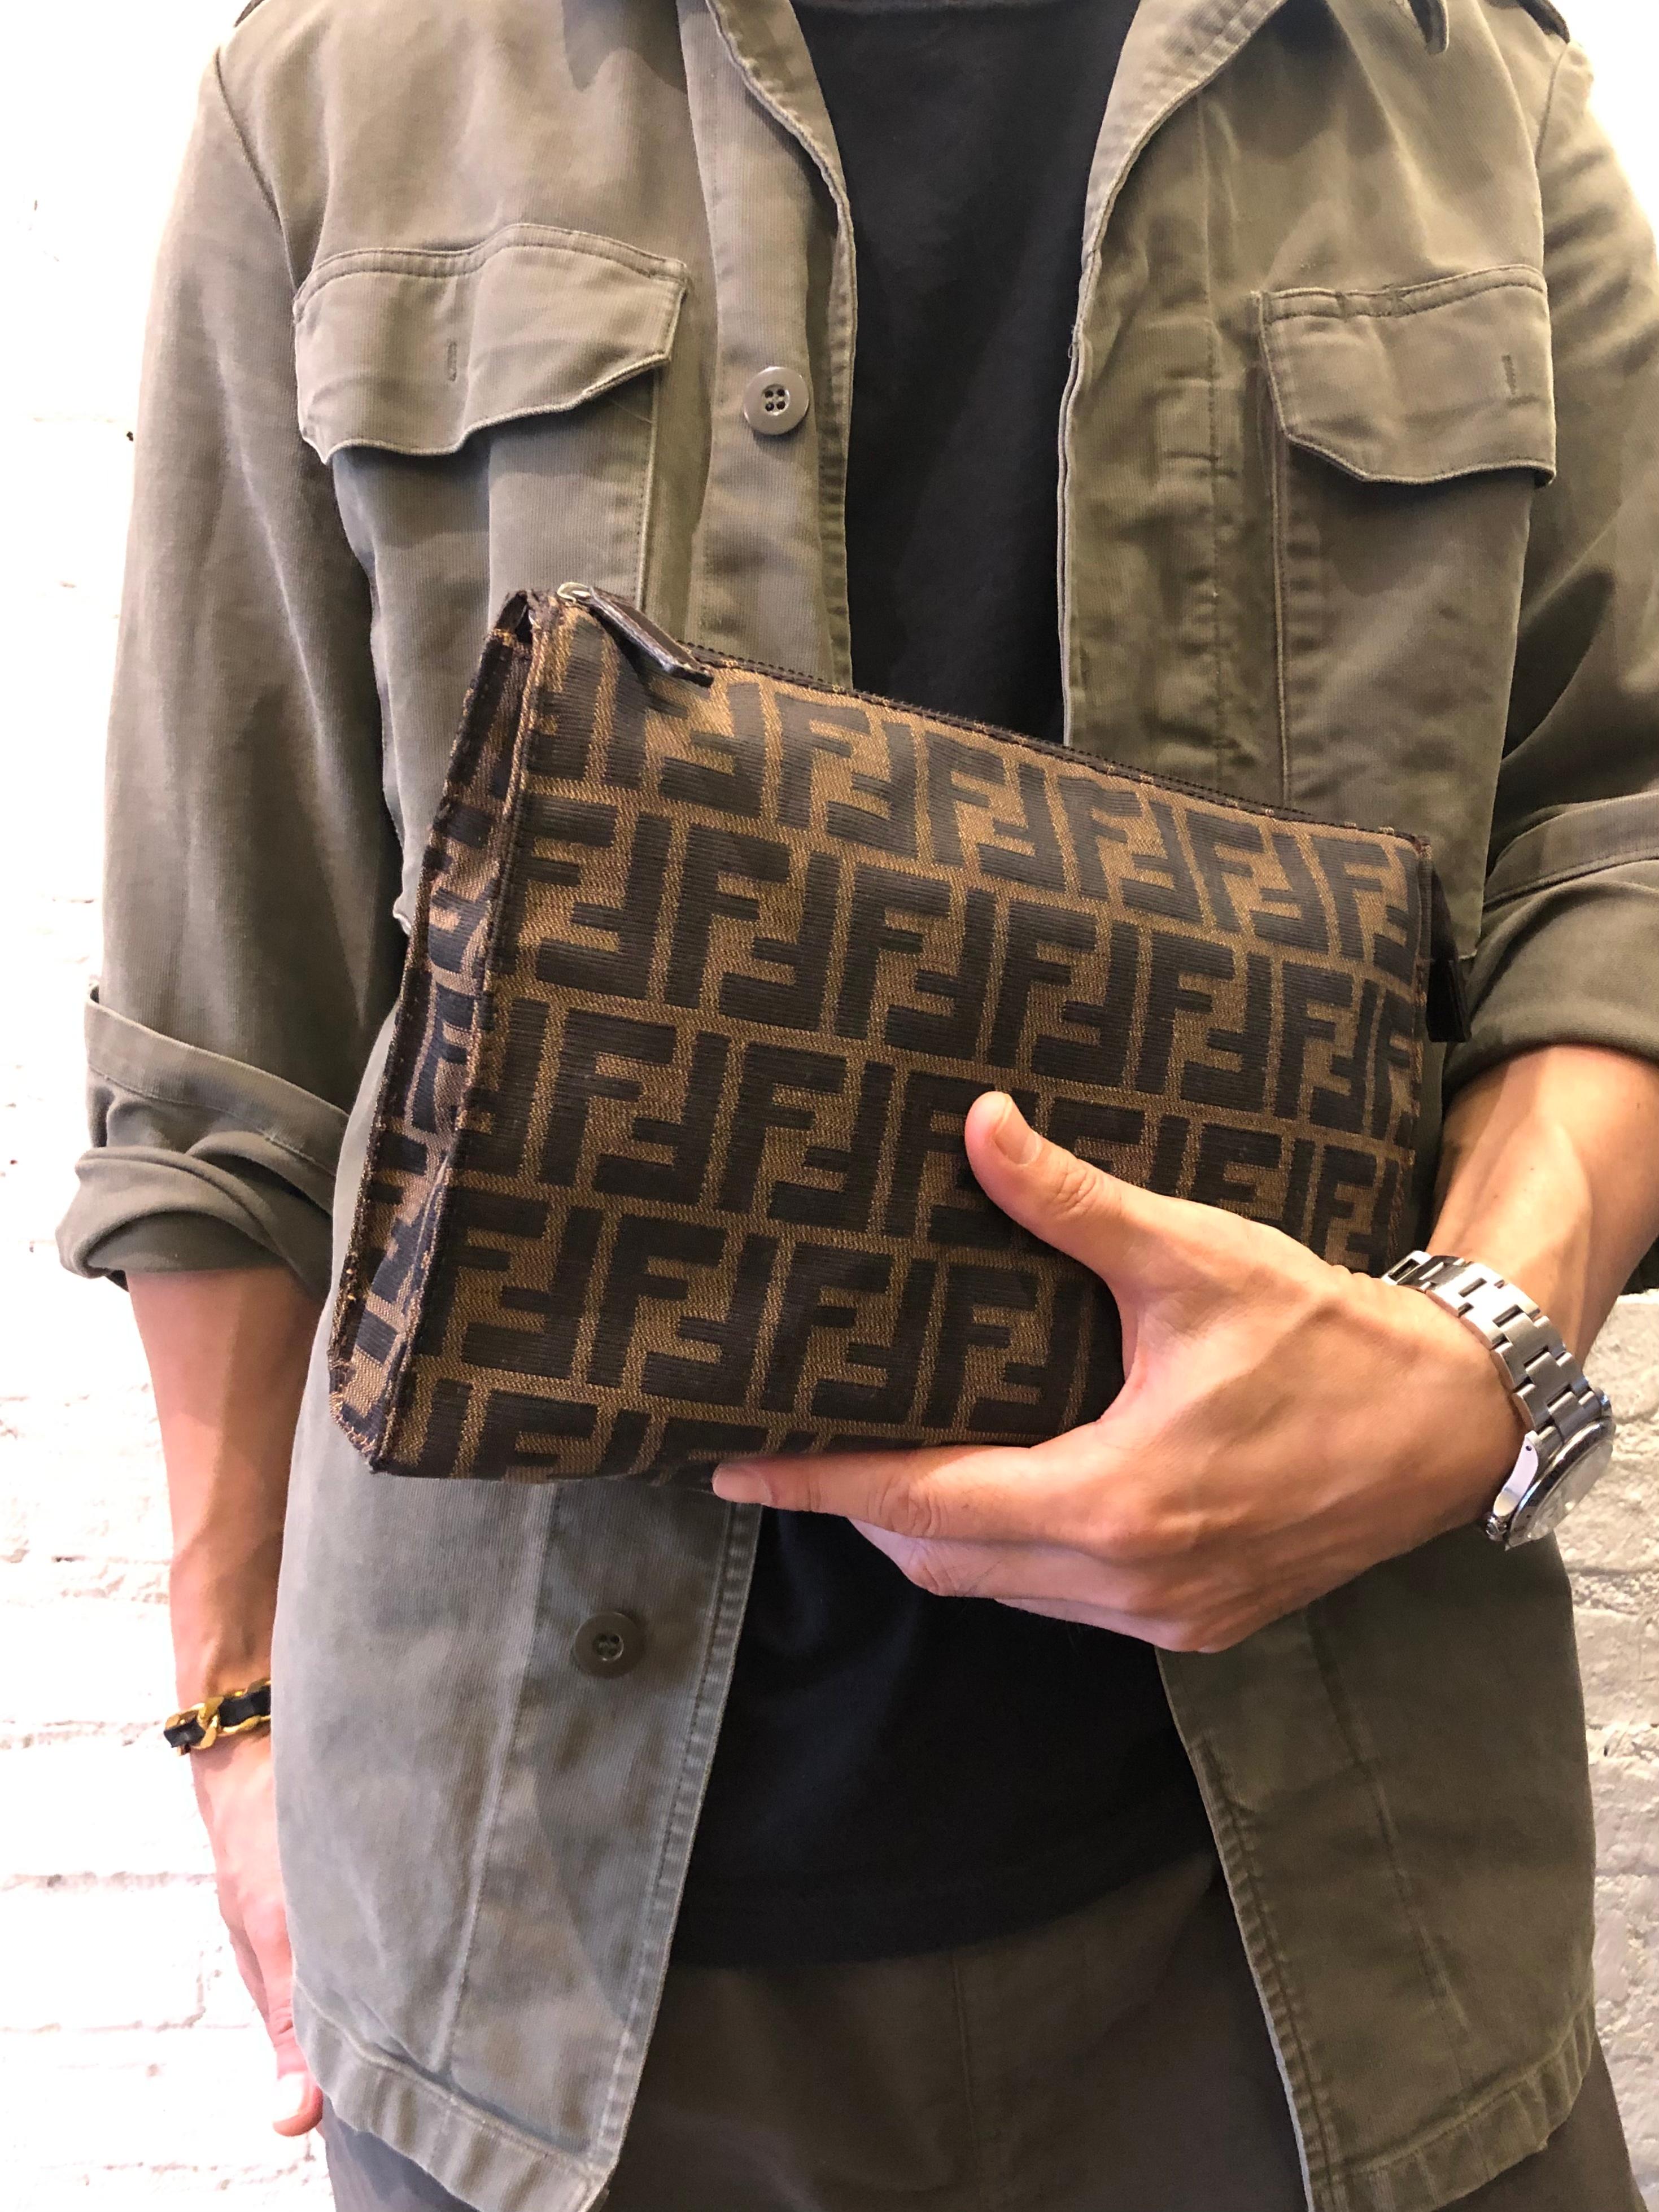 Vintage Fendi clutch bag in Fendi's iconic brown Zucca jacquard. Zipper top opens to a lined interior (interior replaced). Made in Italy. Measures approximately 10 x 8 x 3 inches. Comes with dustbag.

Condition: 

Outside: Minimal signs of wear